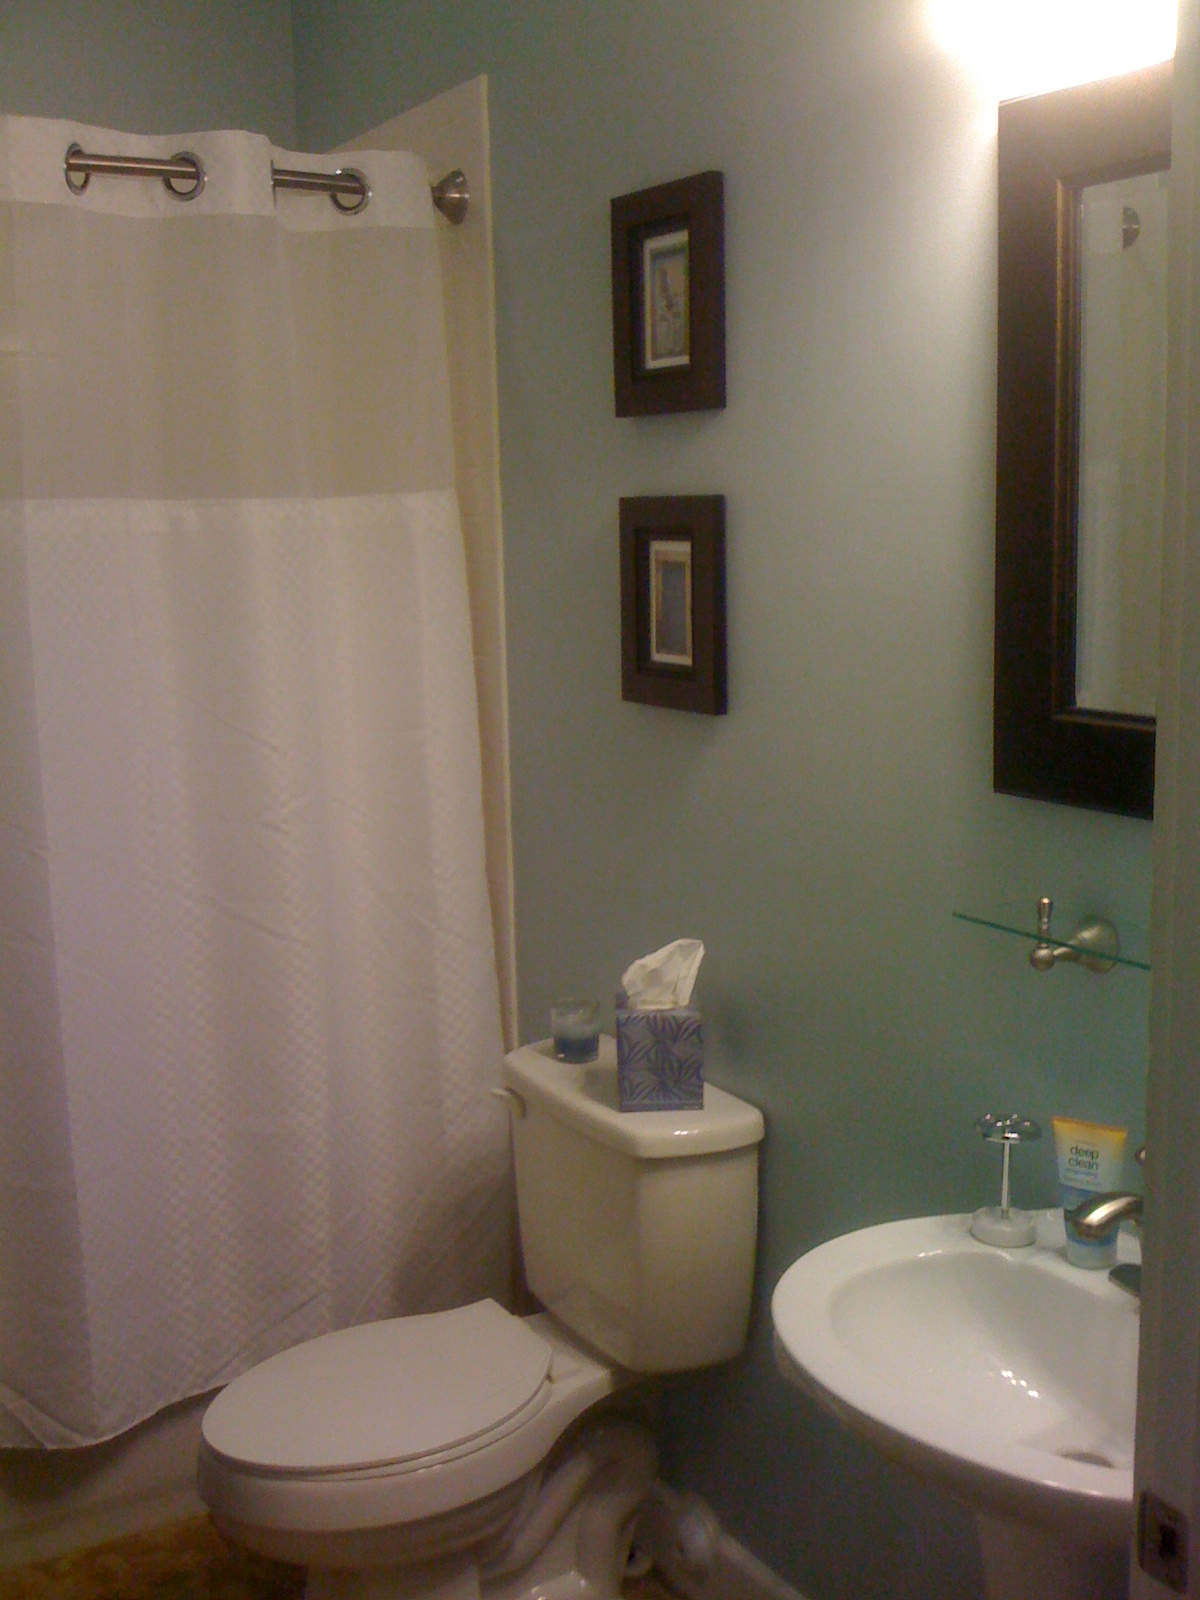 Best Paint Color For A Small Bathroom